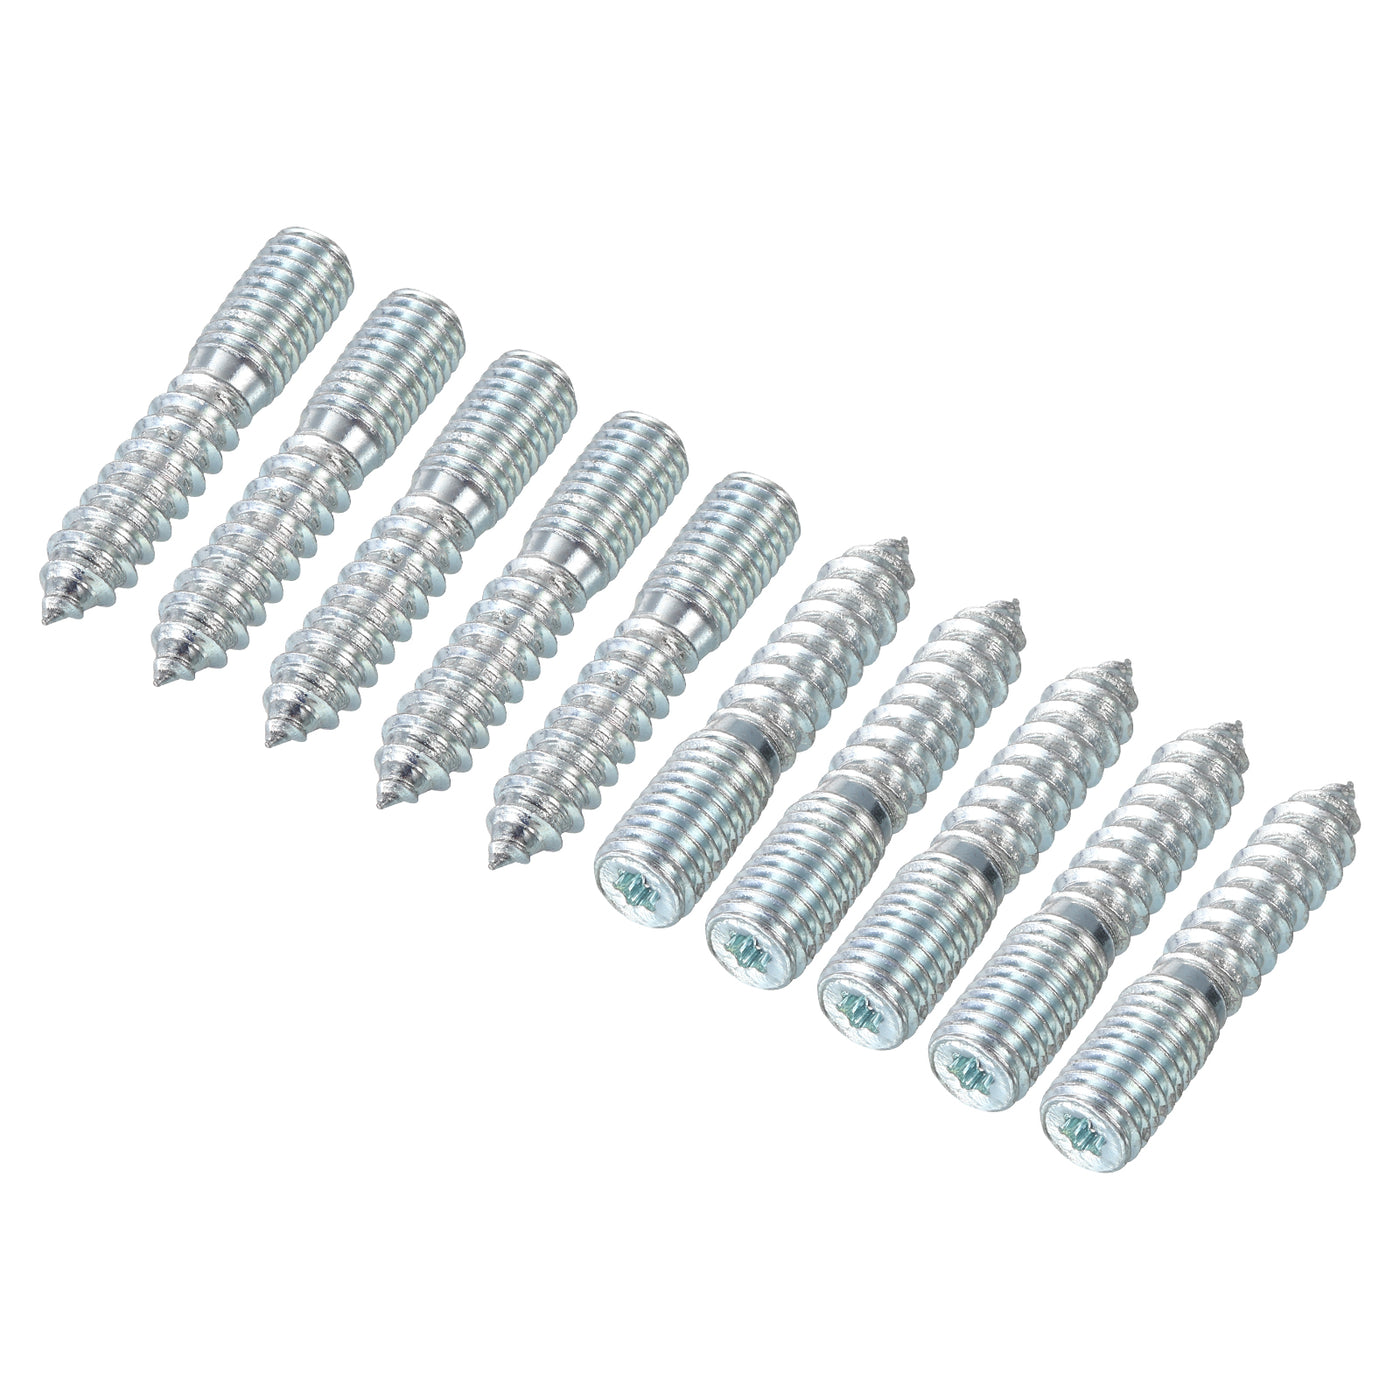 uxcell Uxcell 16Pcs M10x50mm Hanger Bolt Double Headed Bolt Self-Tapping Screw for Furniture